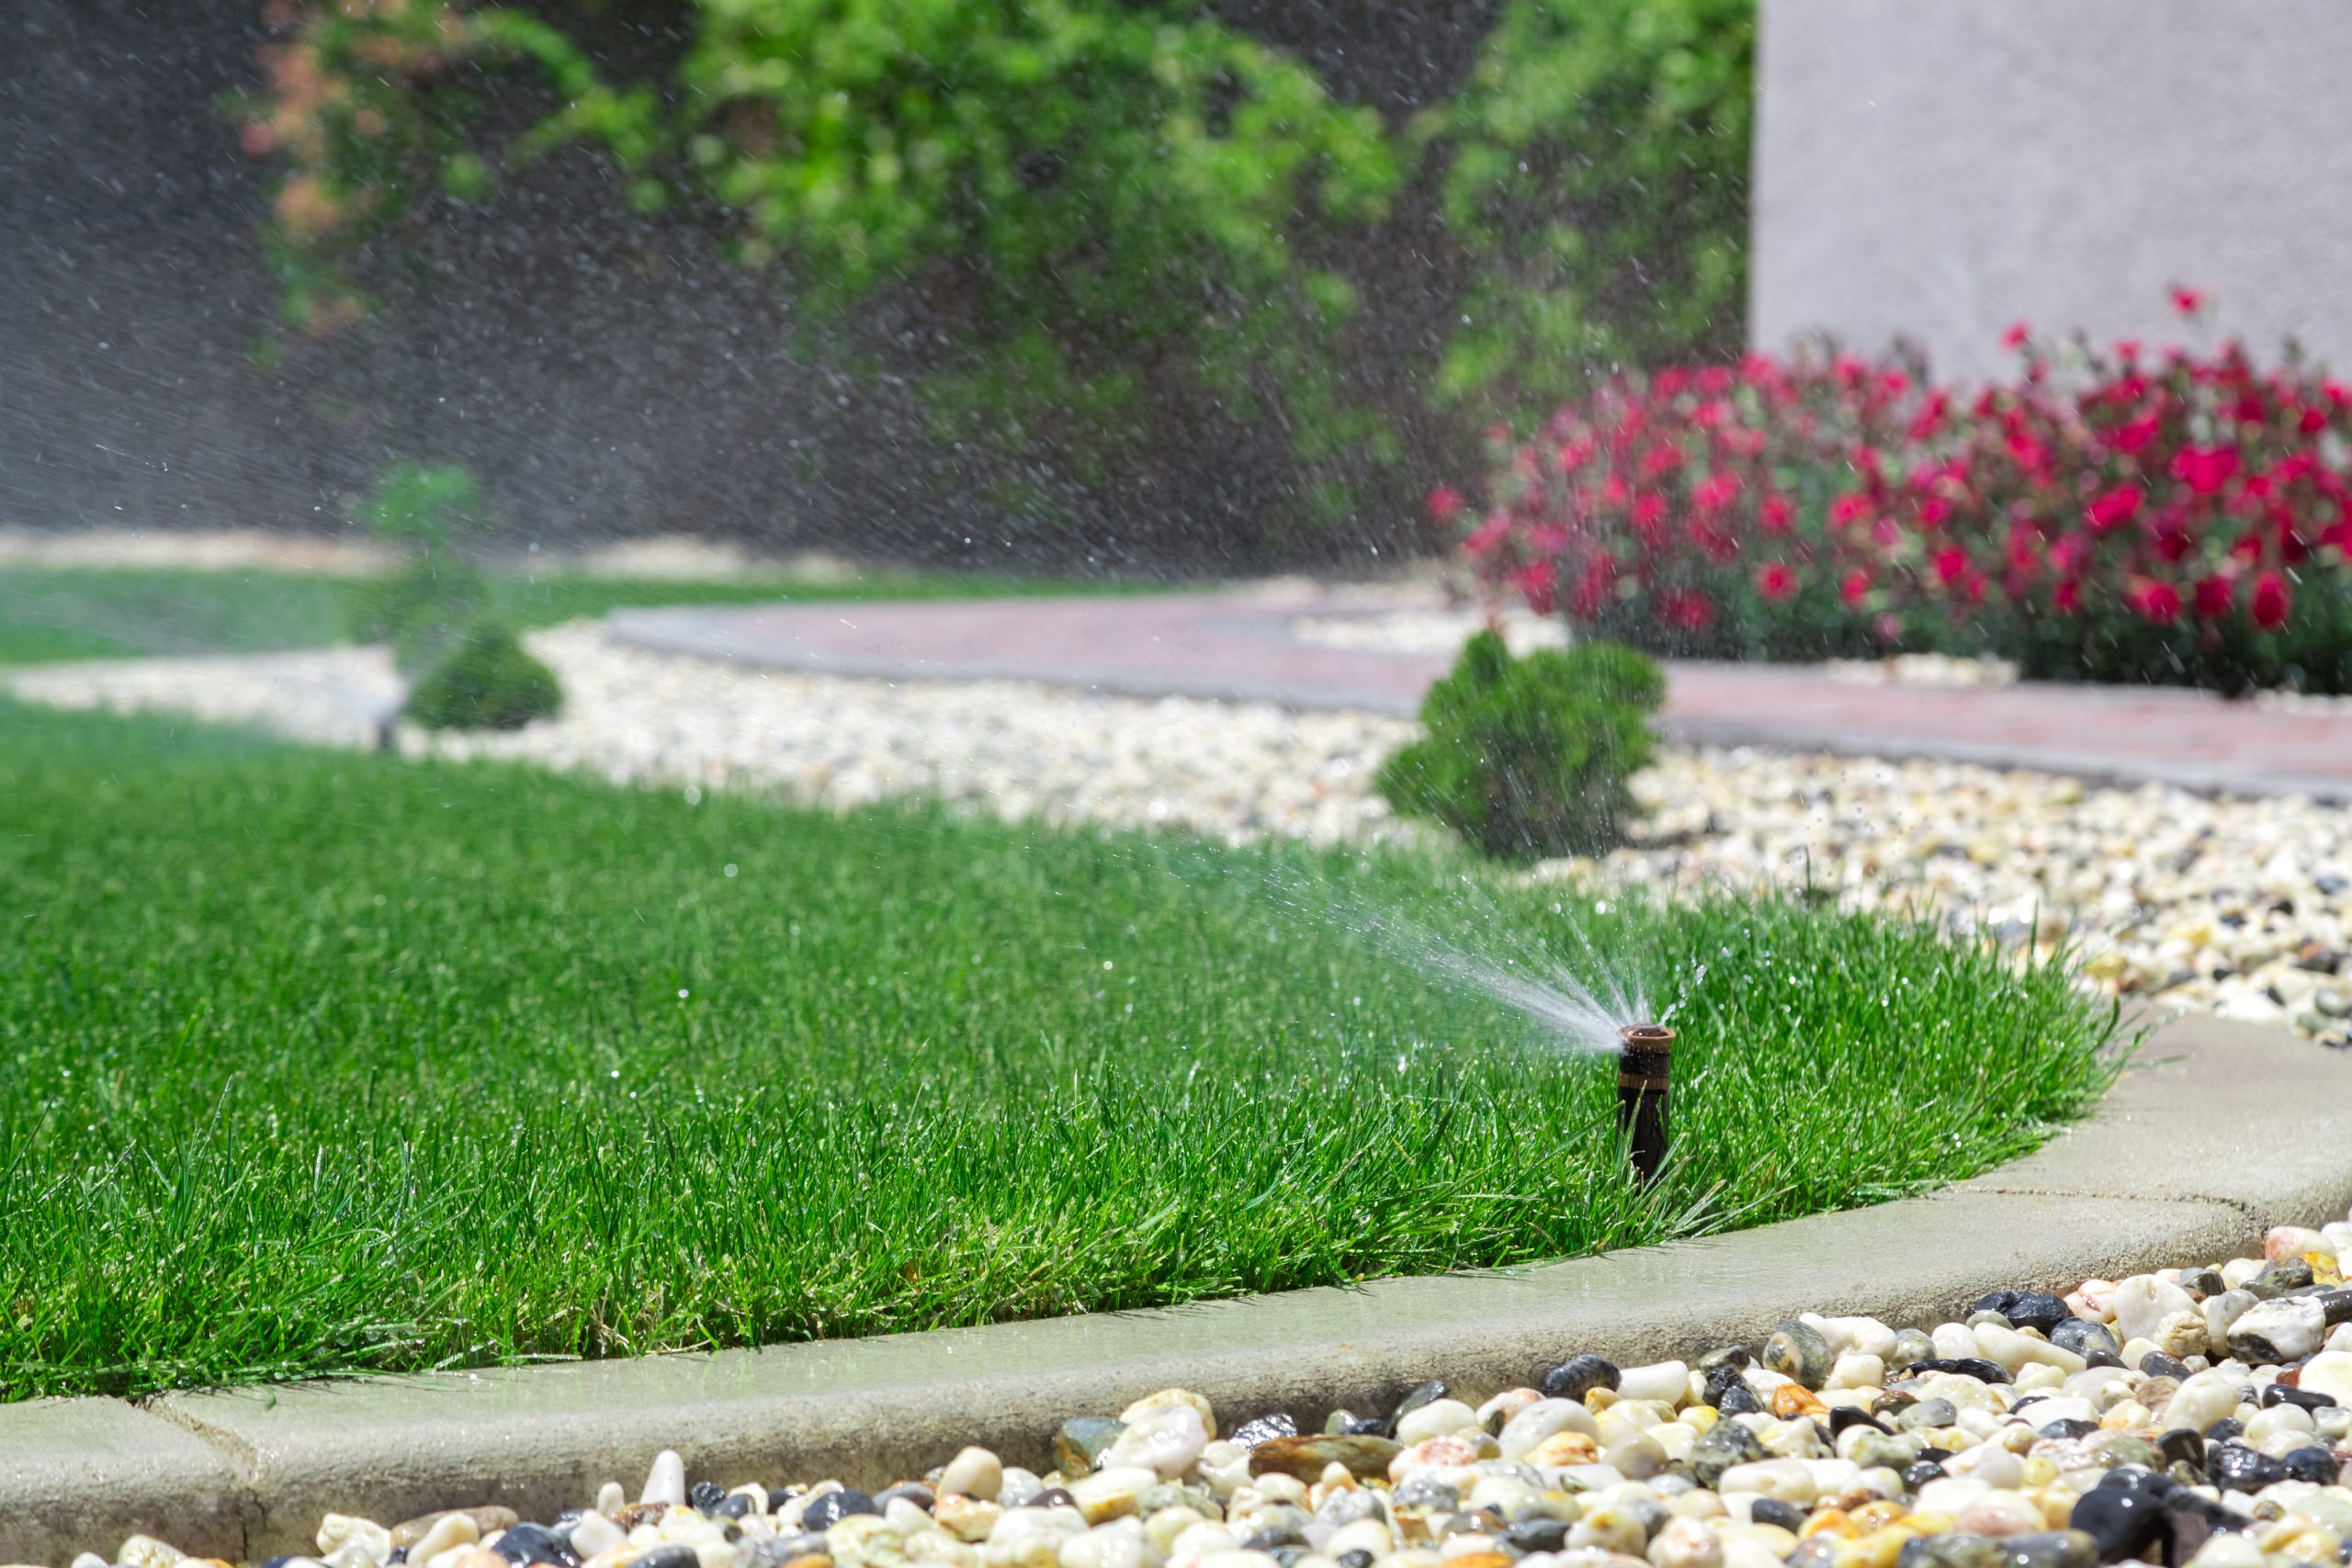 The Top Five Most Common Sprinkler System Problems and How to Fix Them